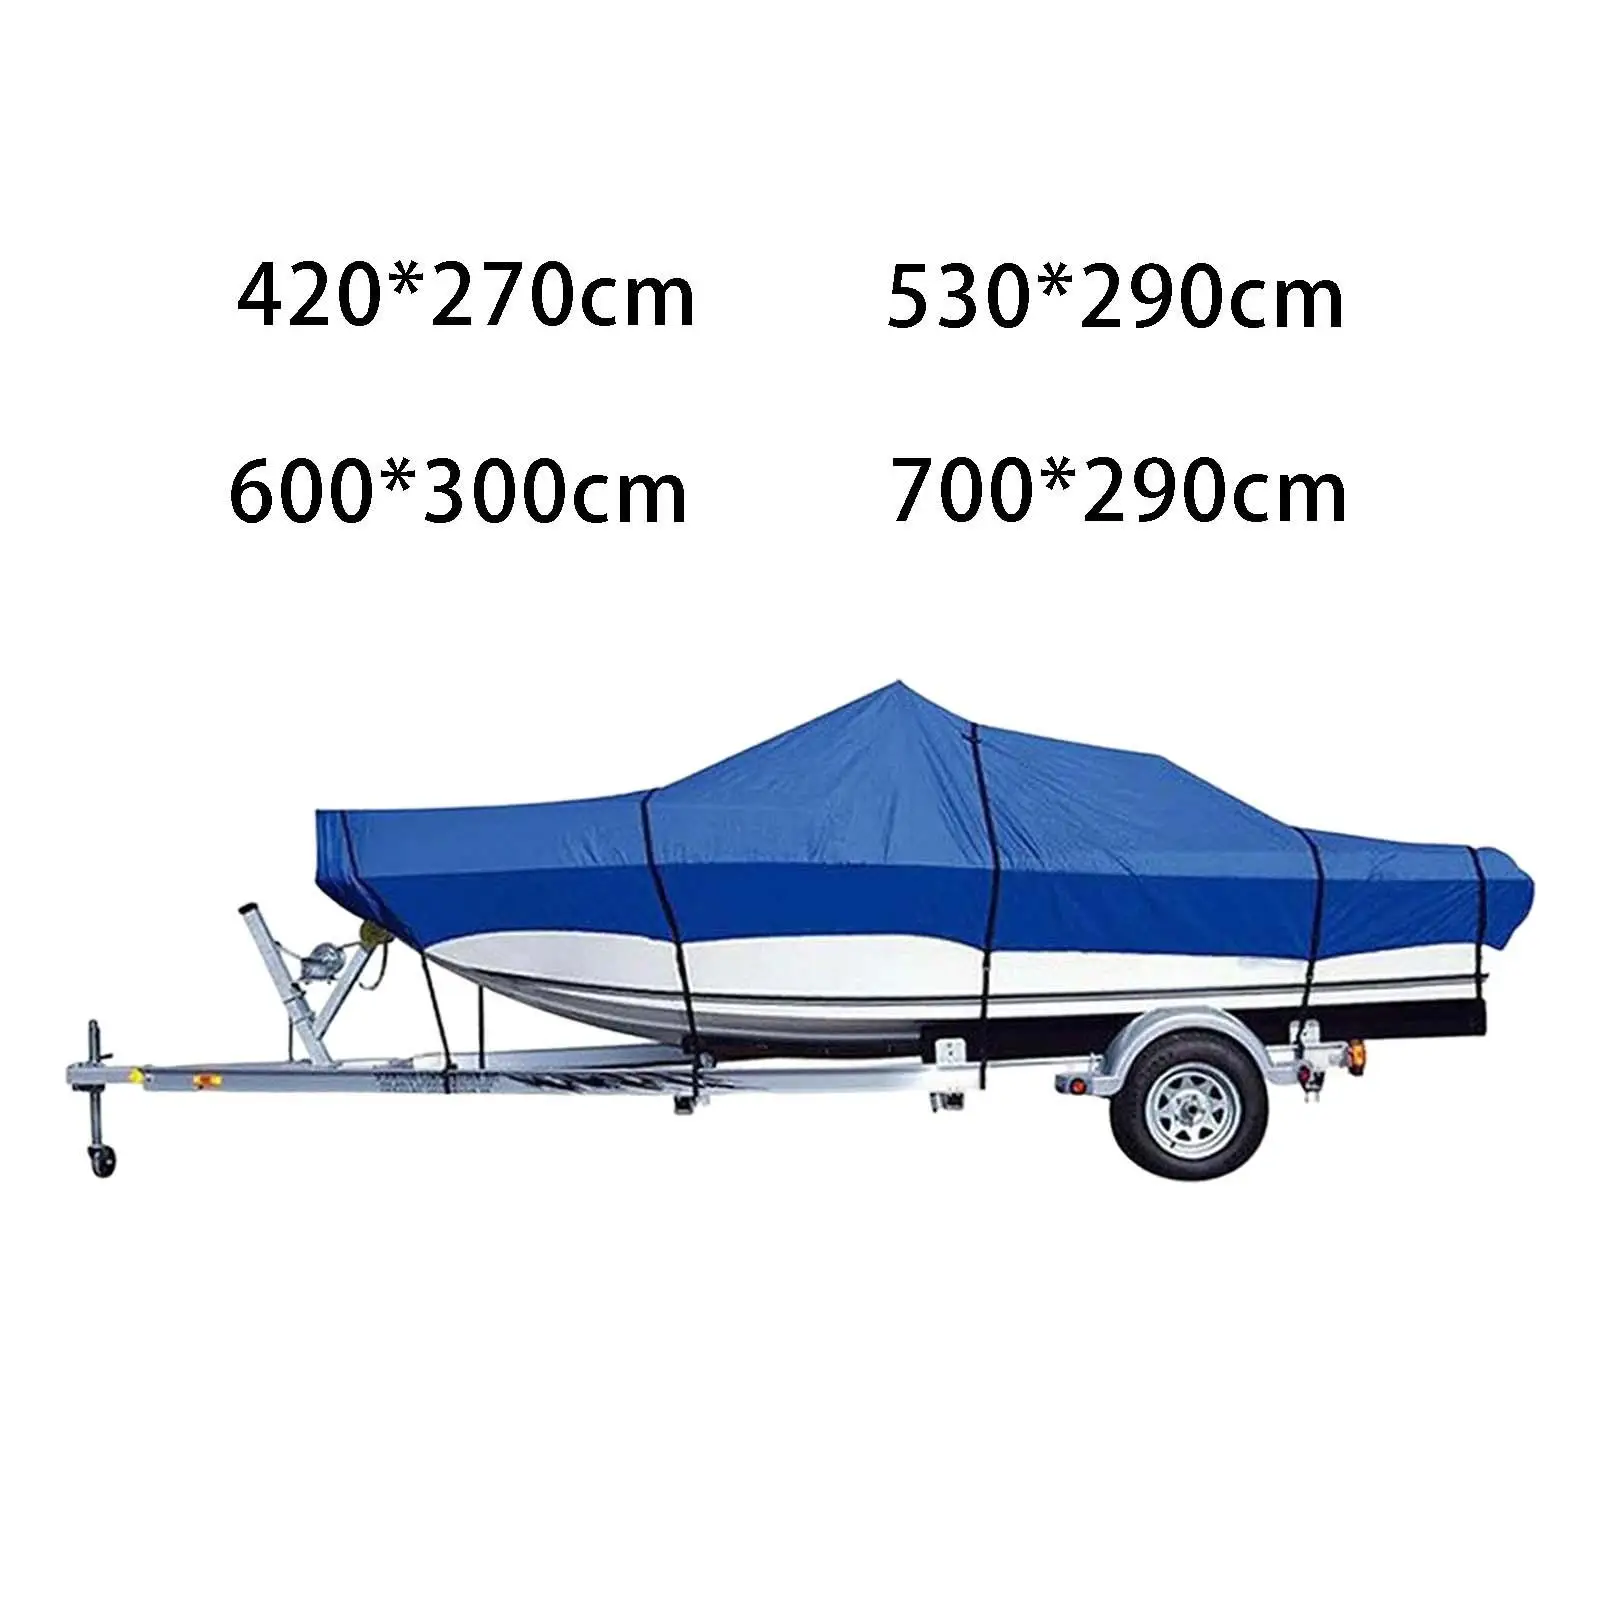 210D Oxford Cloth Boat Cover Anti UV for V Hull Marine Runabout Boat